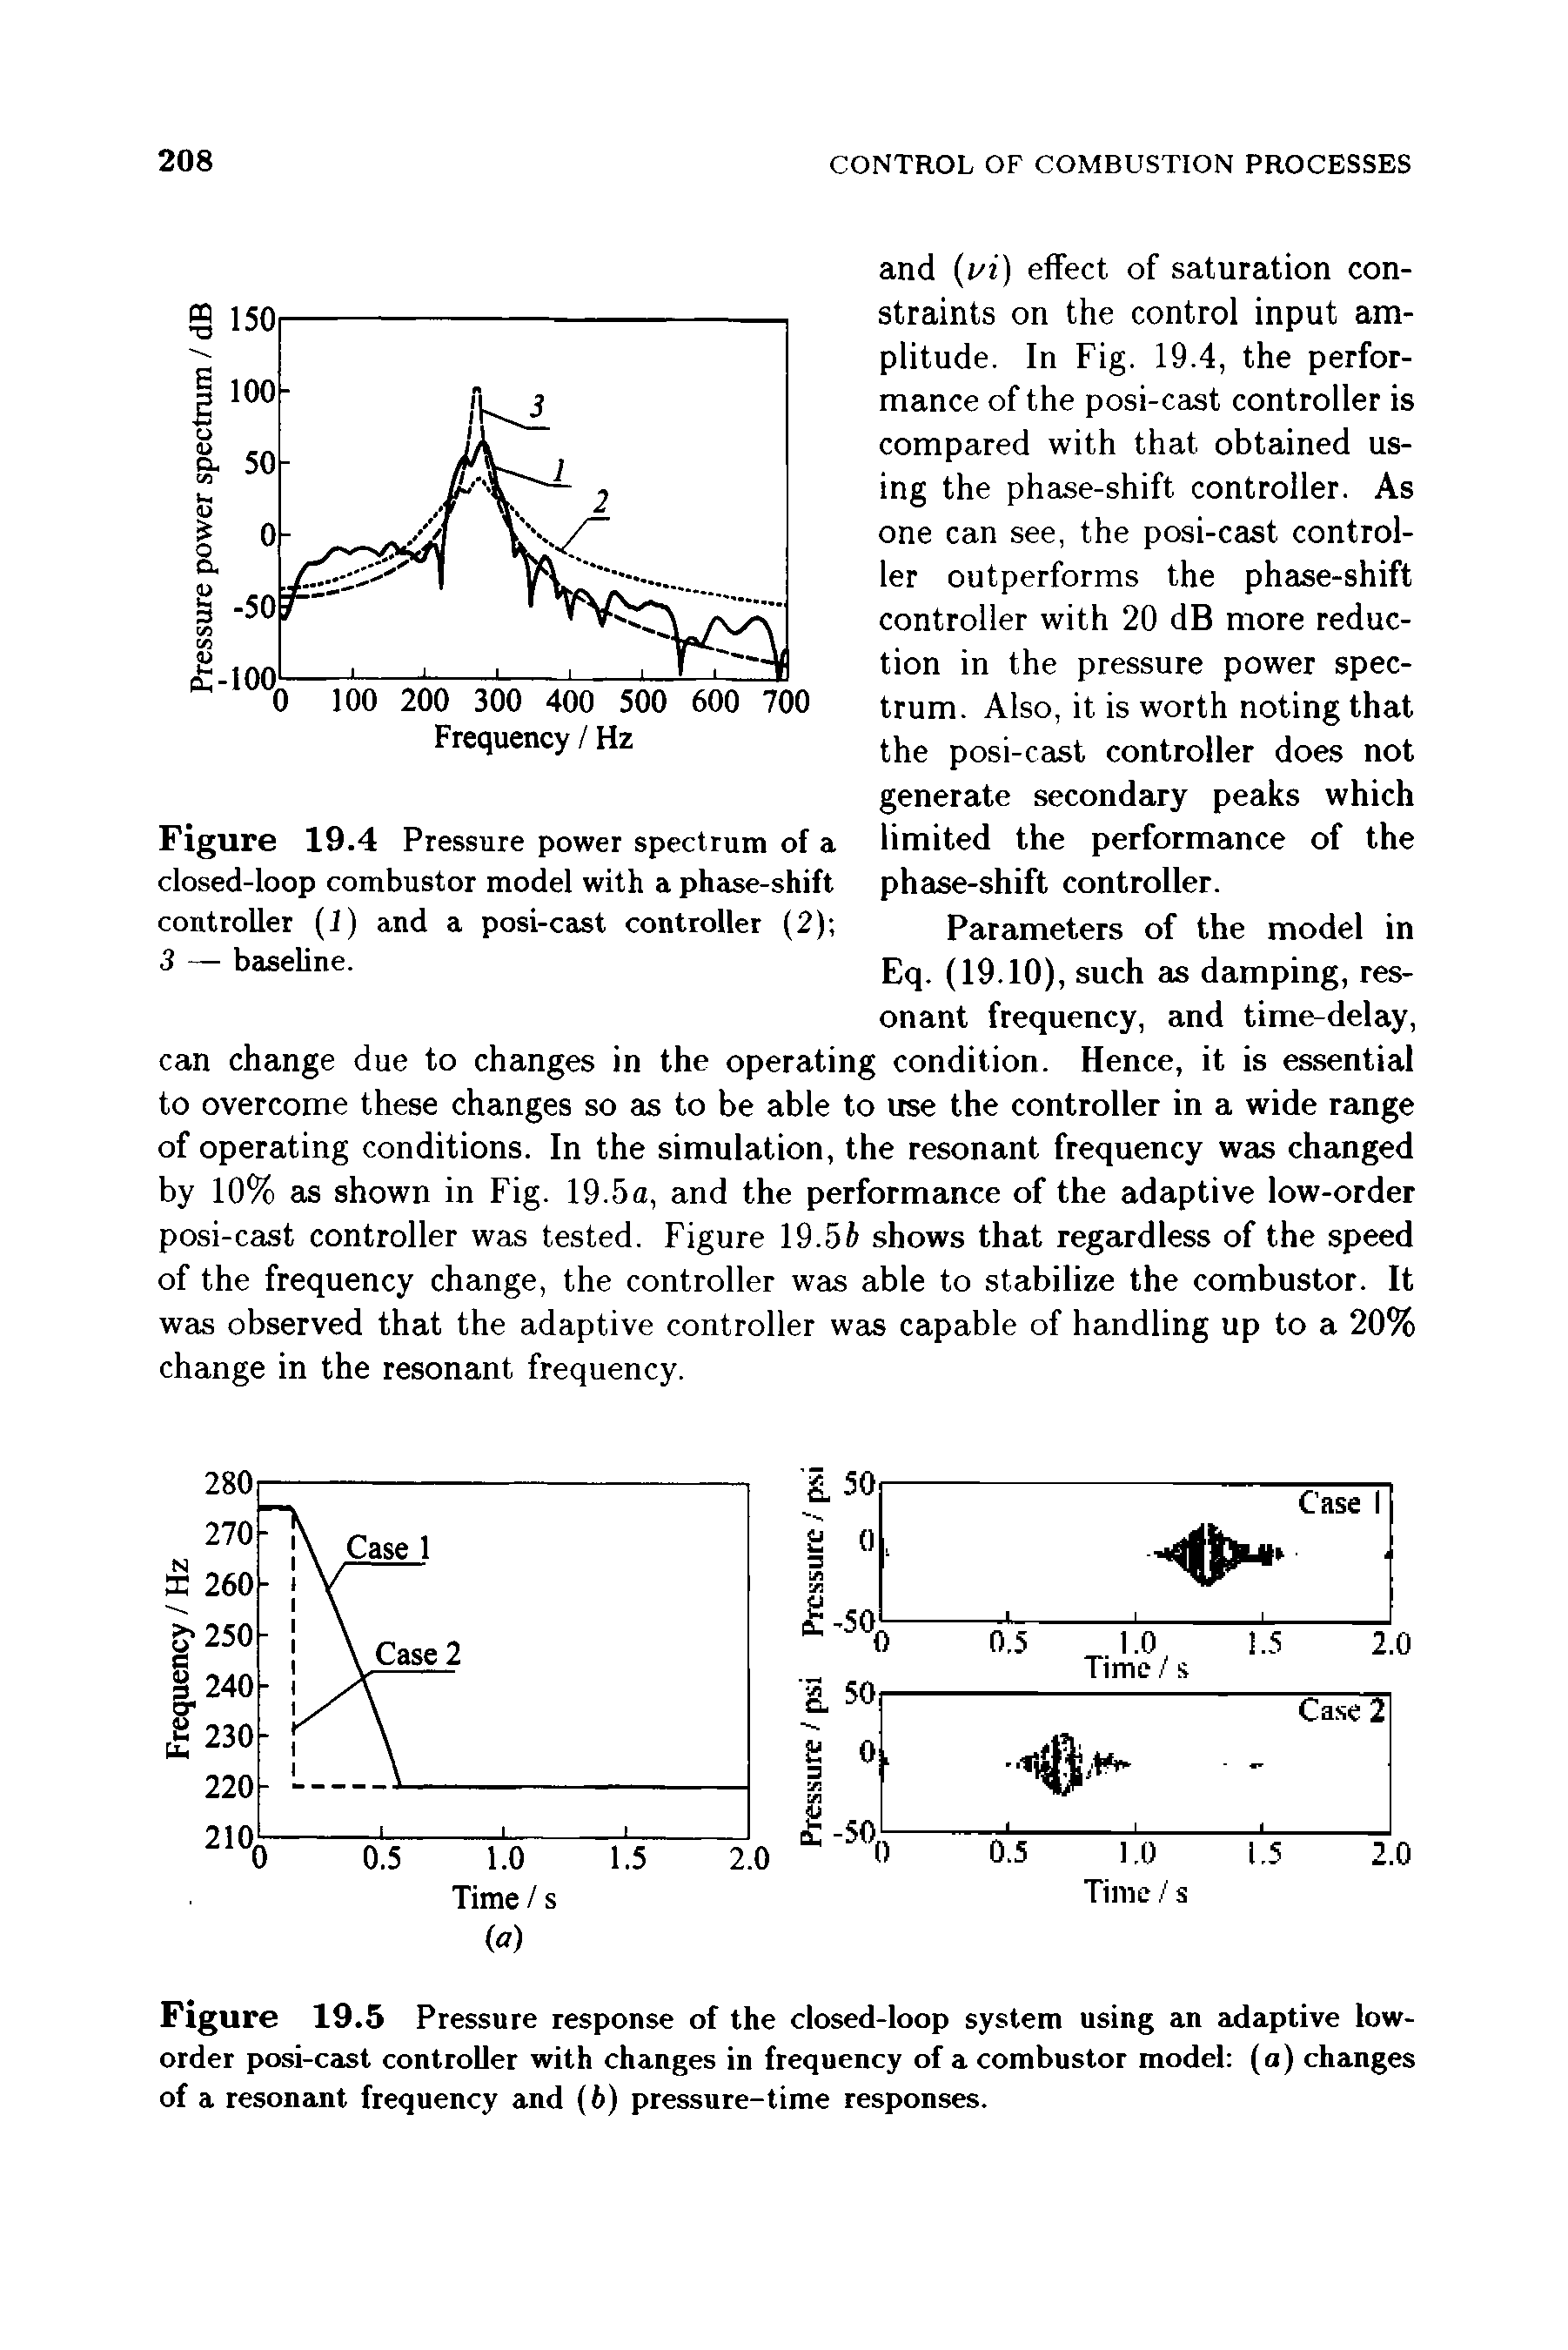 Figure 19.5 Pressure response of the closed-loop system using an adaptive low-order posi-cast controller with changes in frequency of a combustor model (a) changes of a resonant frequency and (6) pressure-time responses.